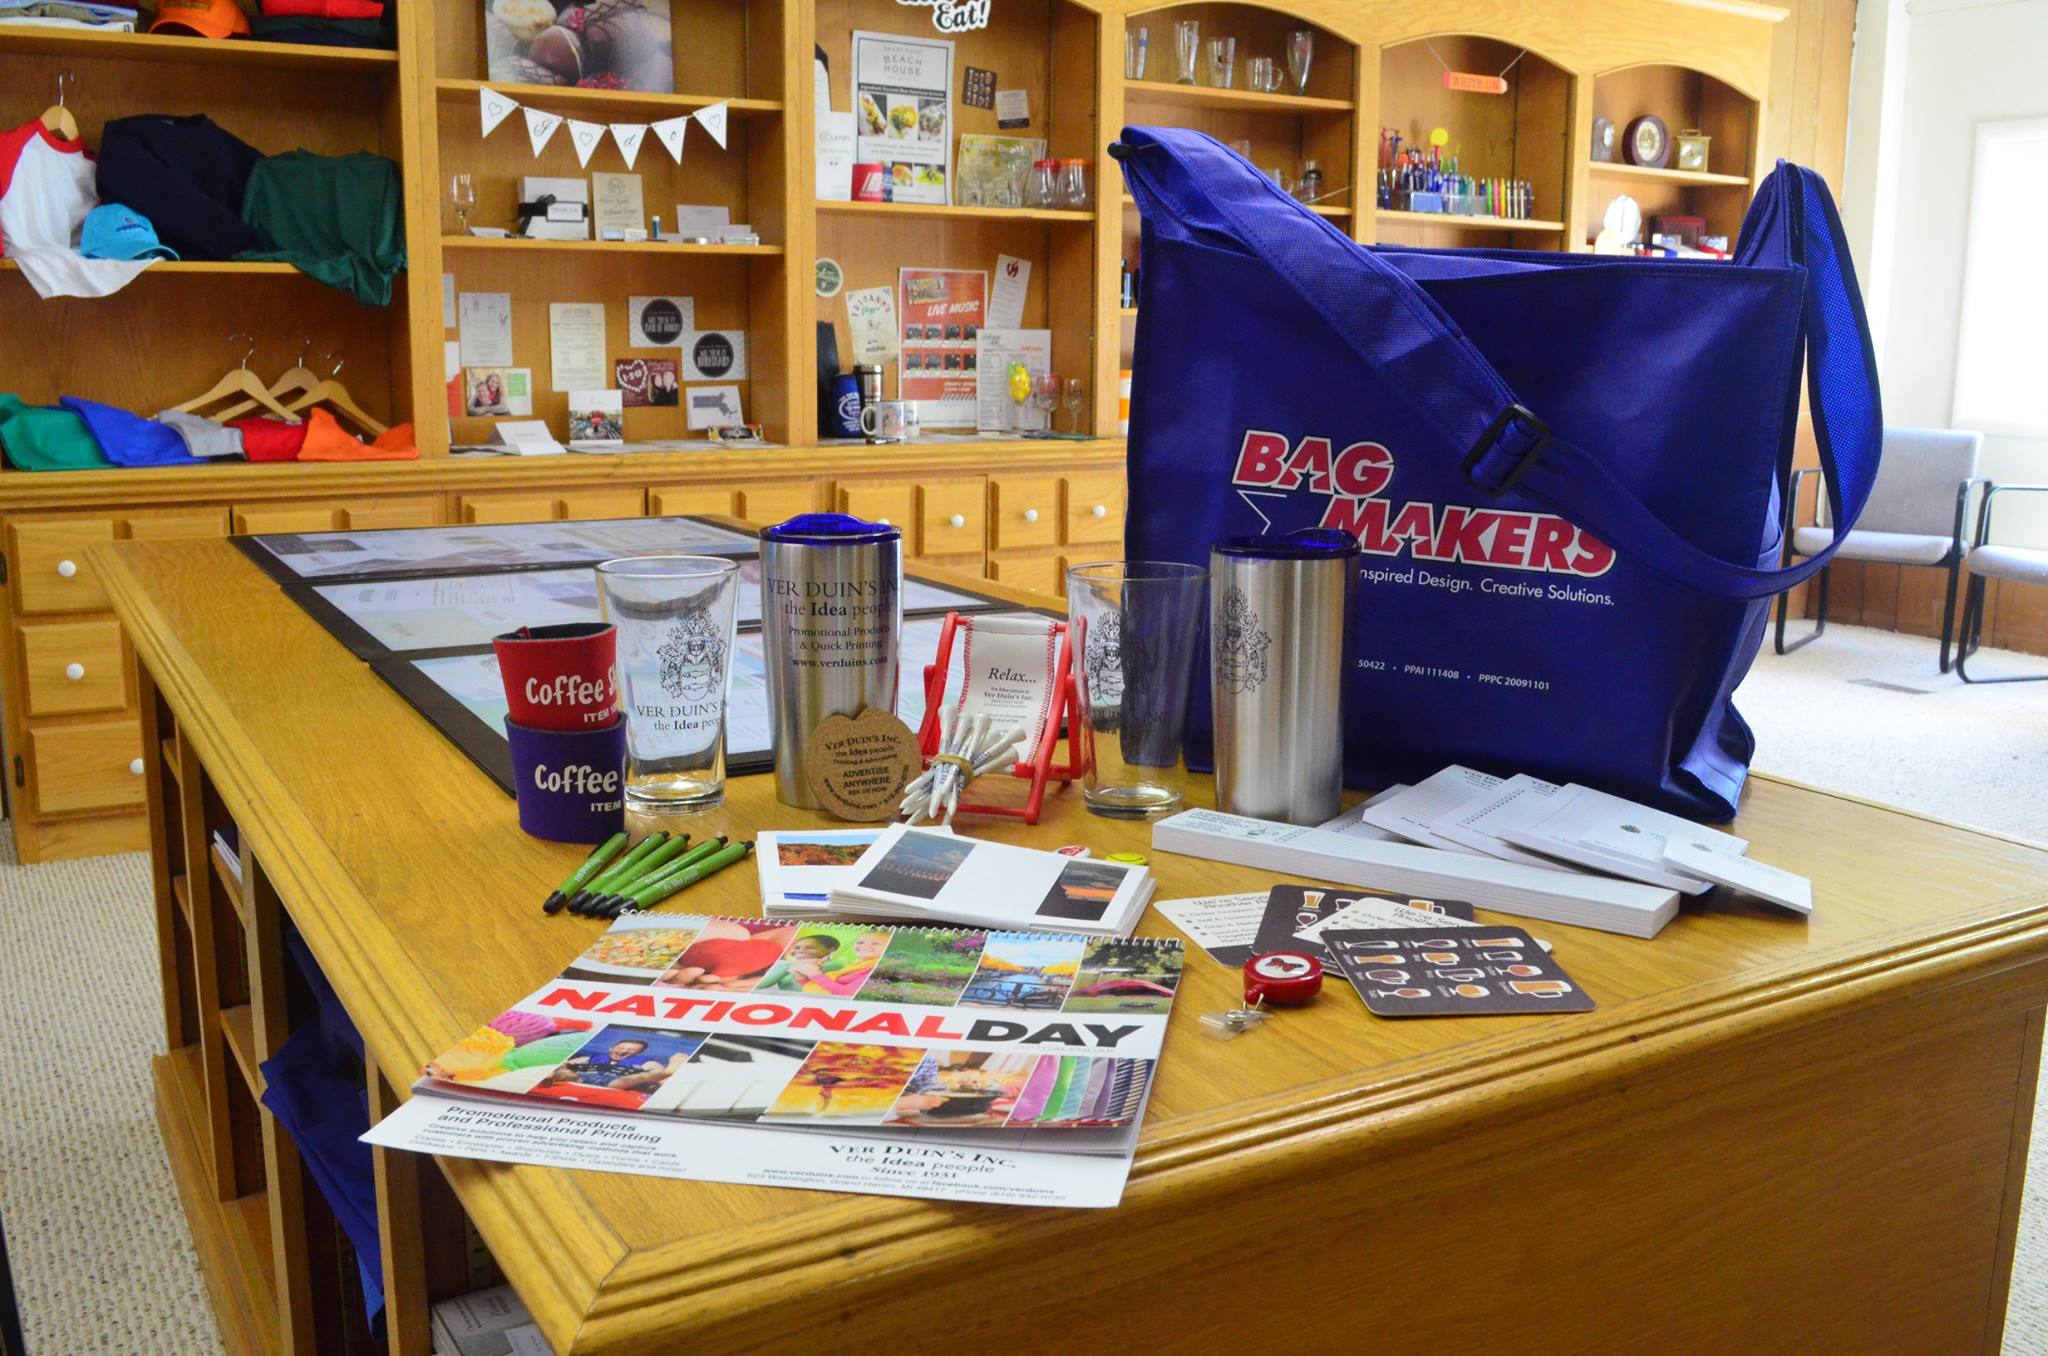 Thousands of promotional product